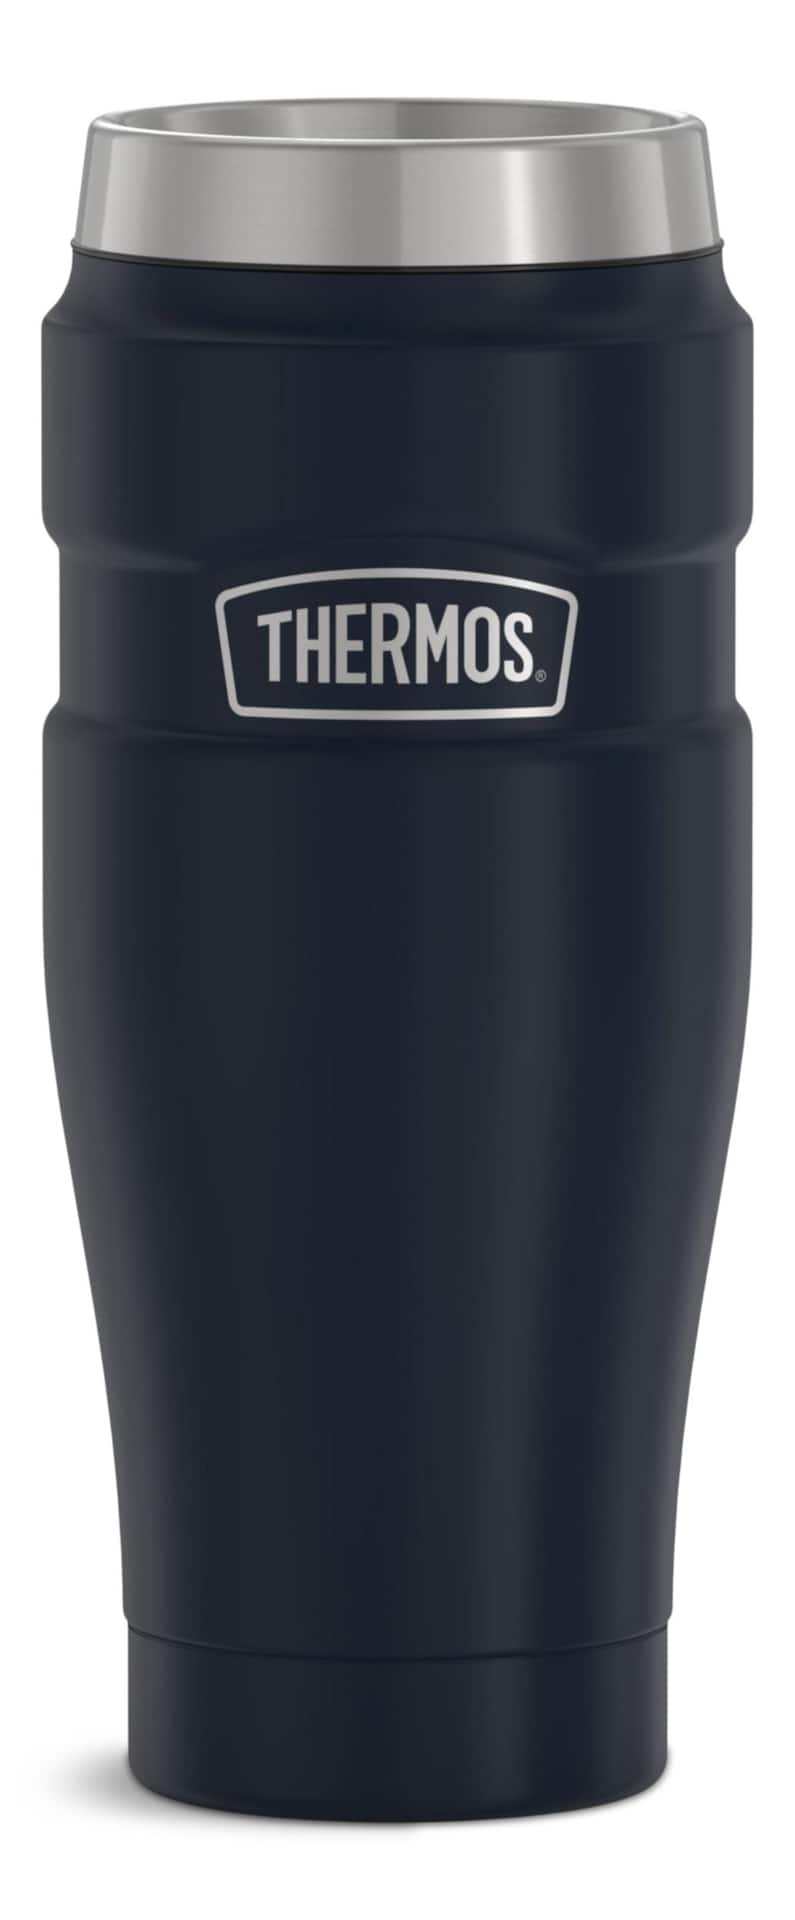 https://media-www.canadiantire.ca/product/living/kitchen/food-storage/1422109/thermos-stainless-steel-king-tumbler-16-oz--dfb0a8ff-249a-4cd2-965e-abcfac8d0449-jpgrendition.jpg